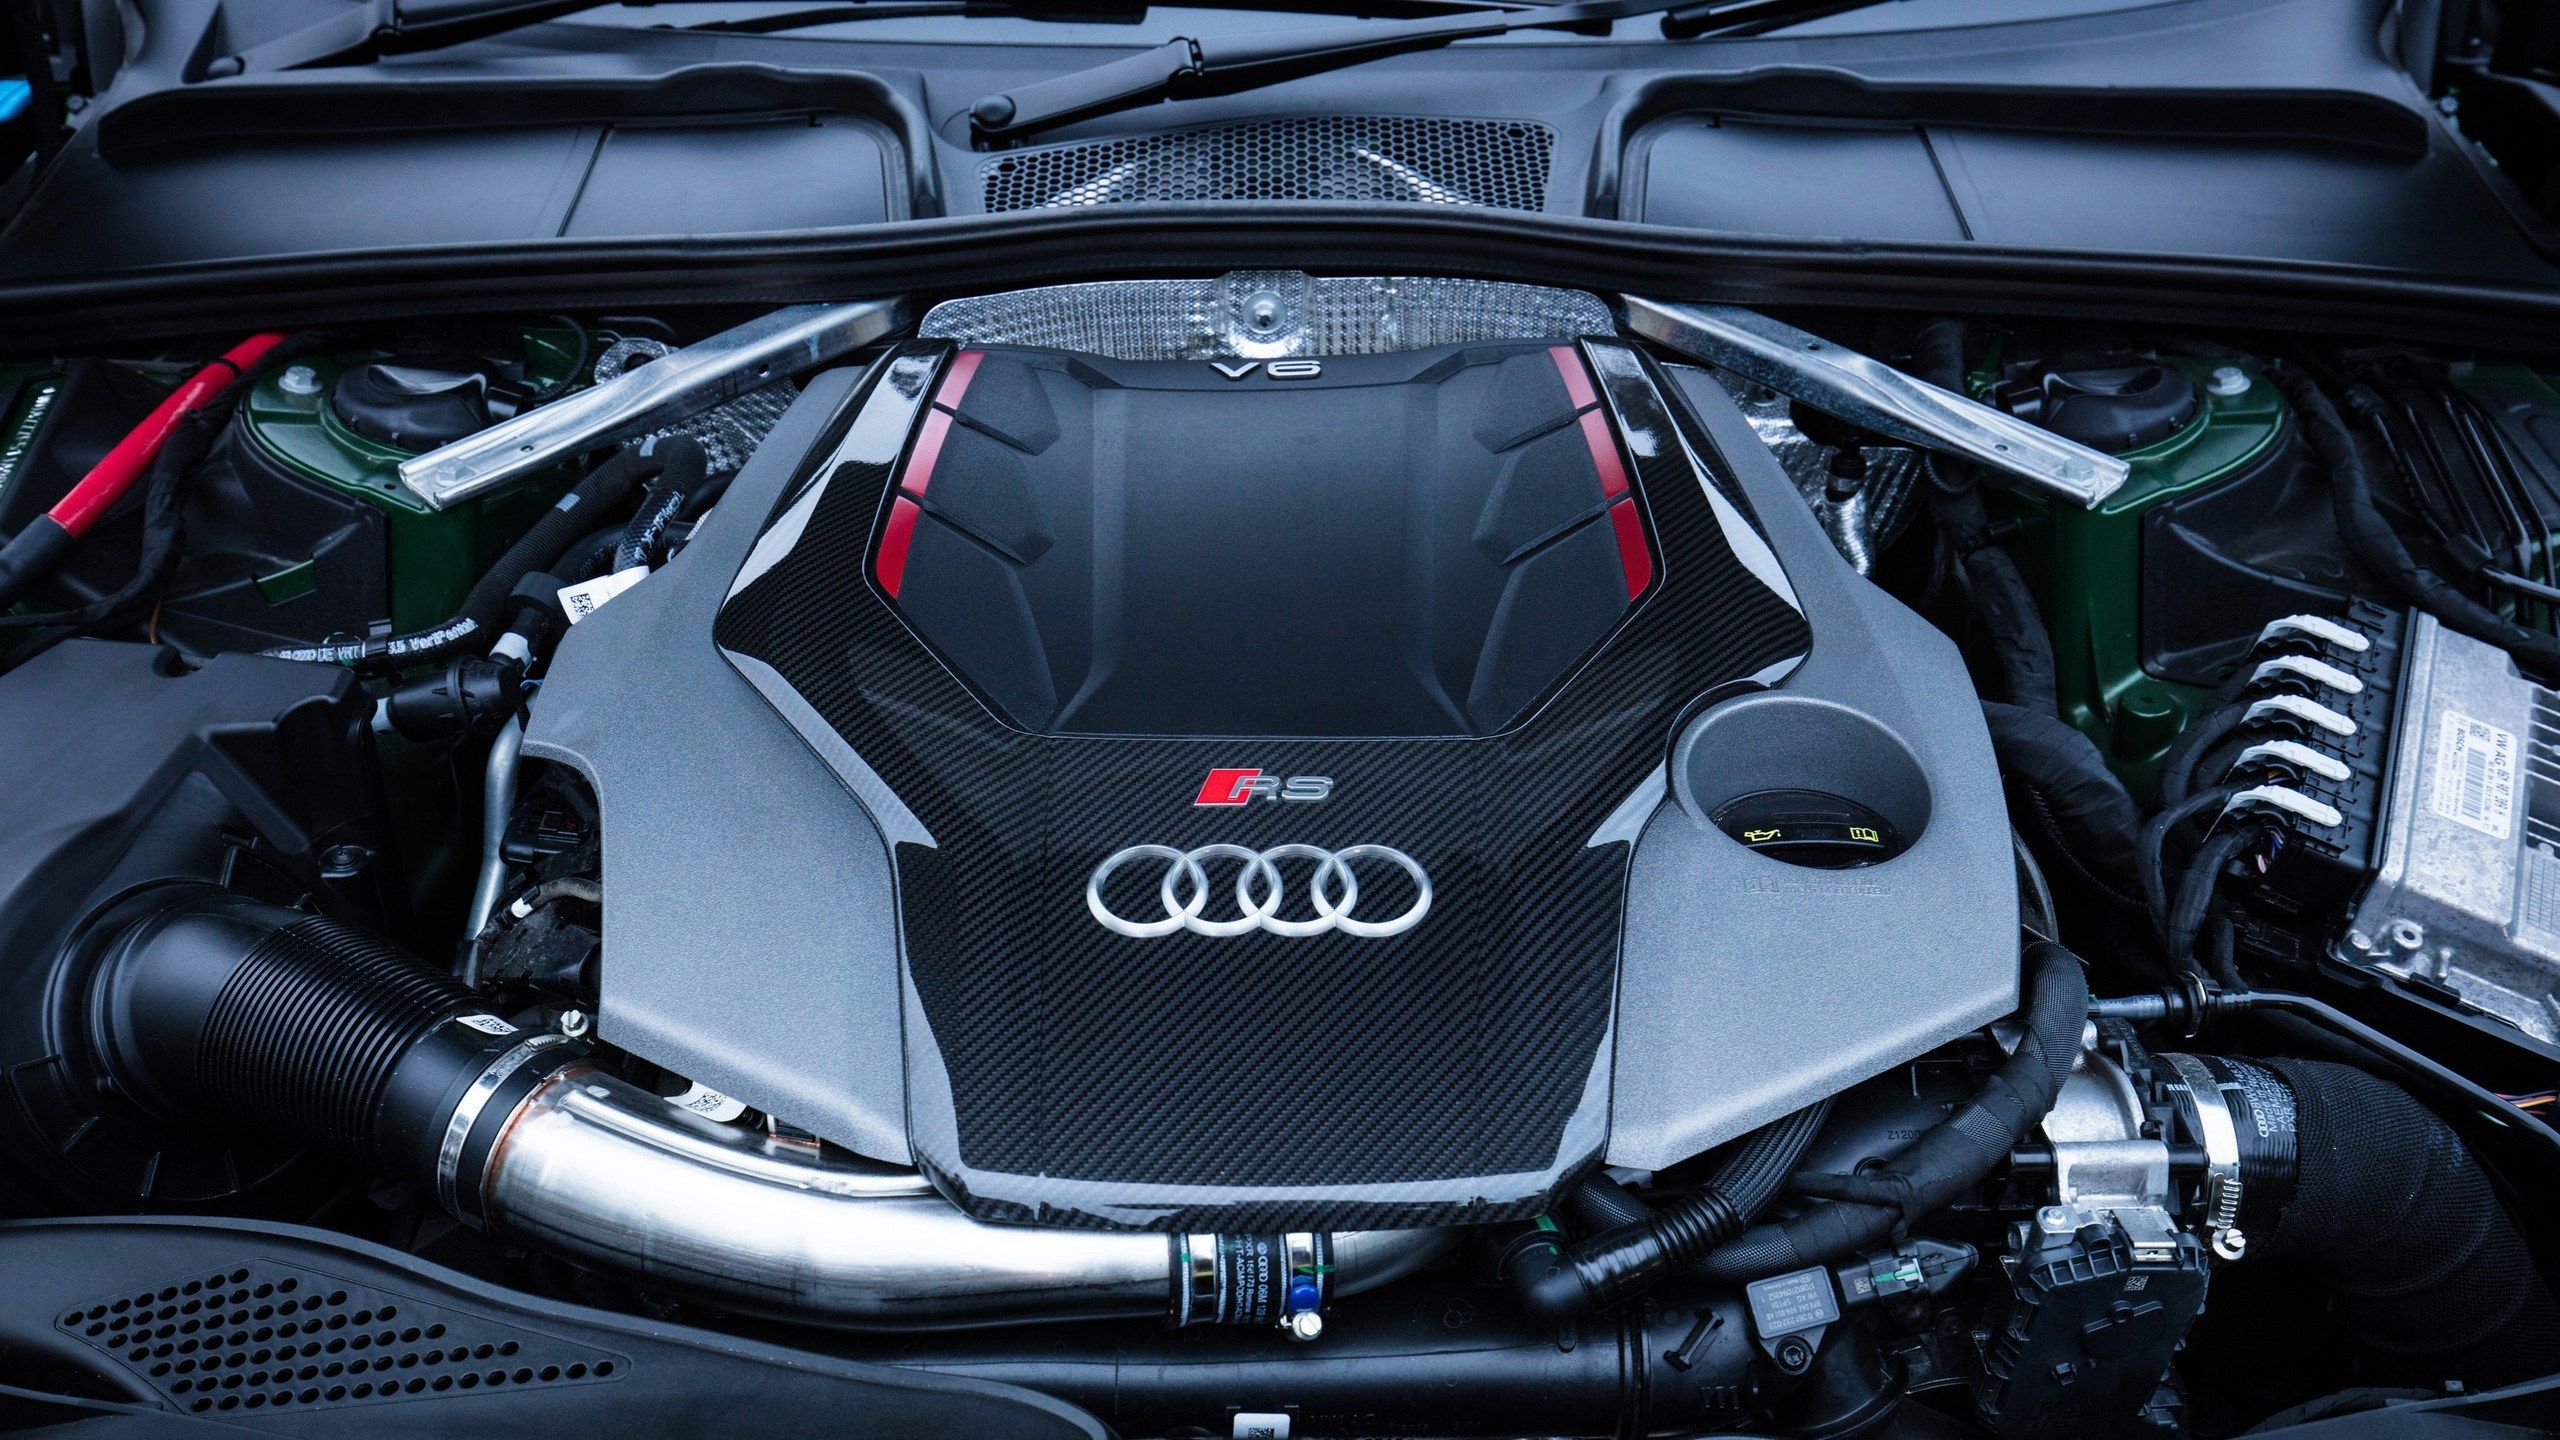 Free download 2560x1440 Audi Rs5 Engine 1440p Resolution HD 4k Wallpaper Image [2560x1440] for your Desktop, Mobile & Tablet. Explore Audi Engine Wallpaper. Audi Engine Wallpaper, Steam Engine Wallpaper